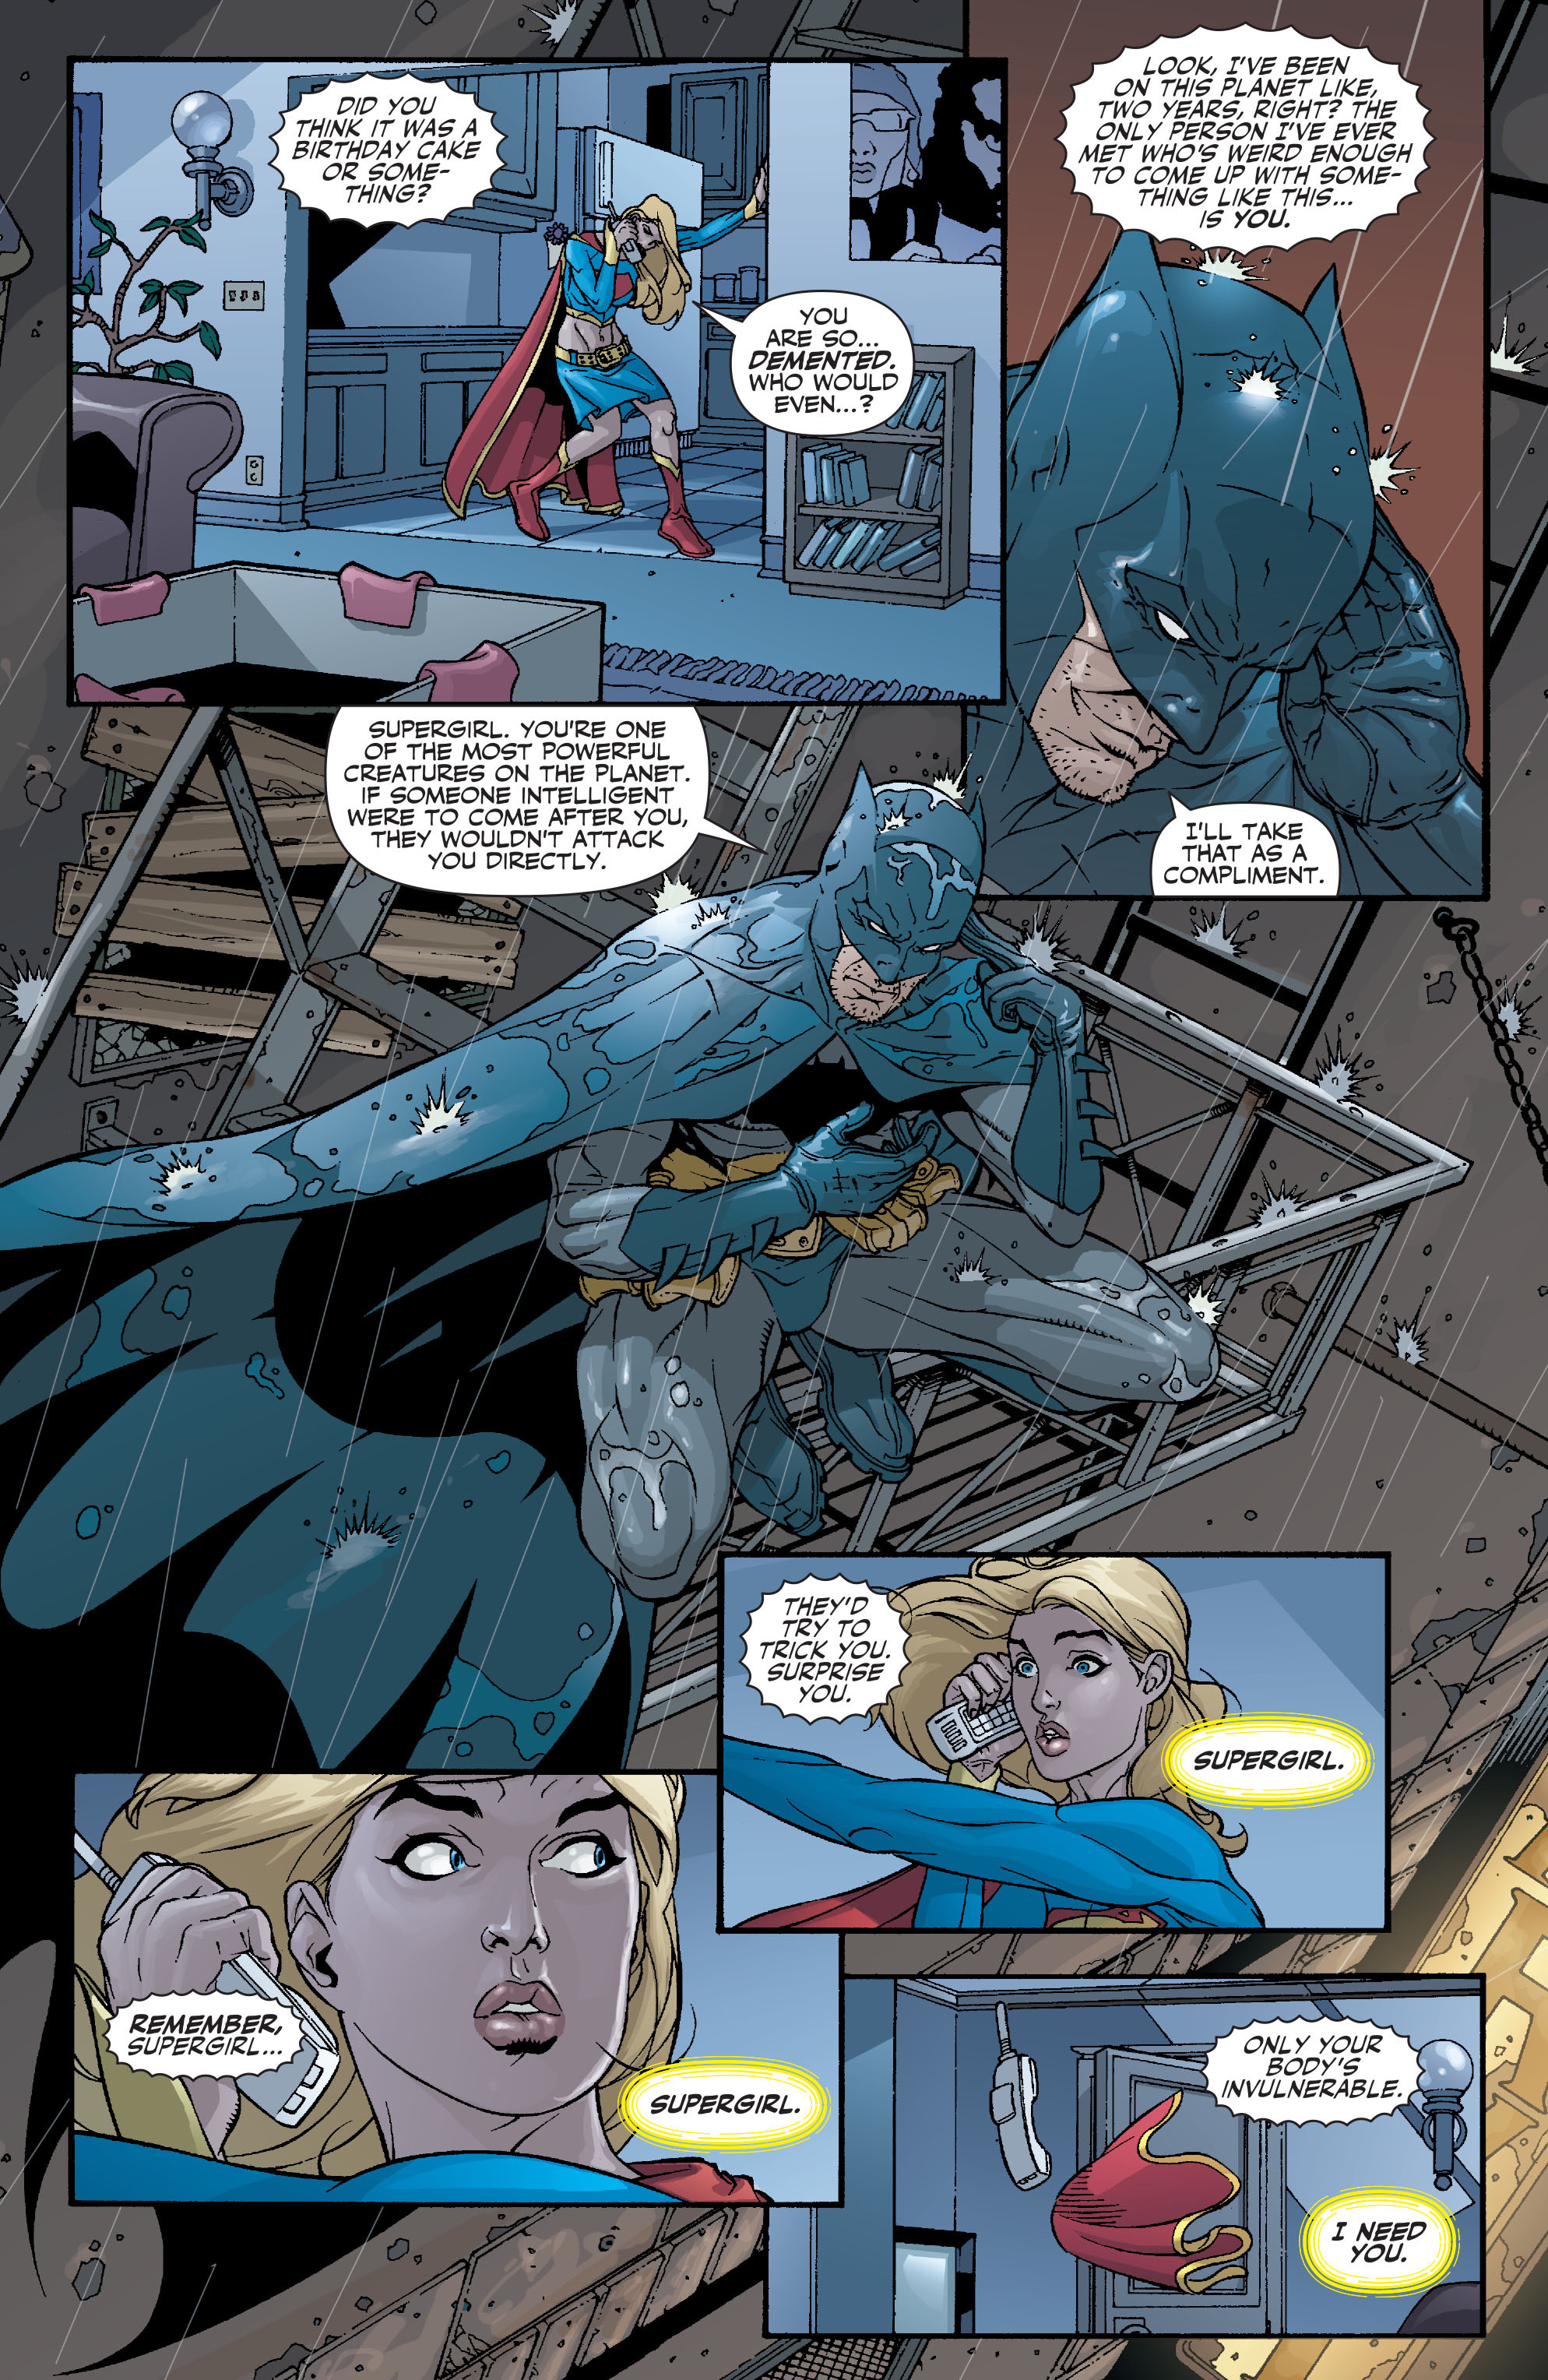 Supergirl (2005) 23 Page 4